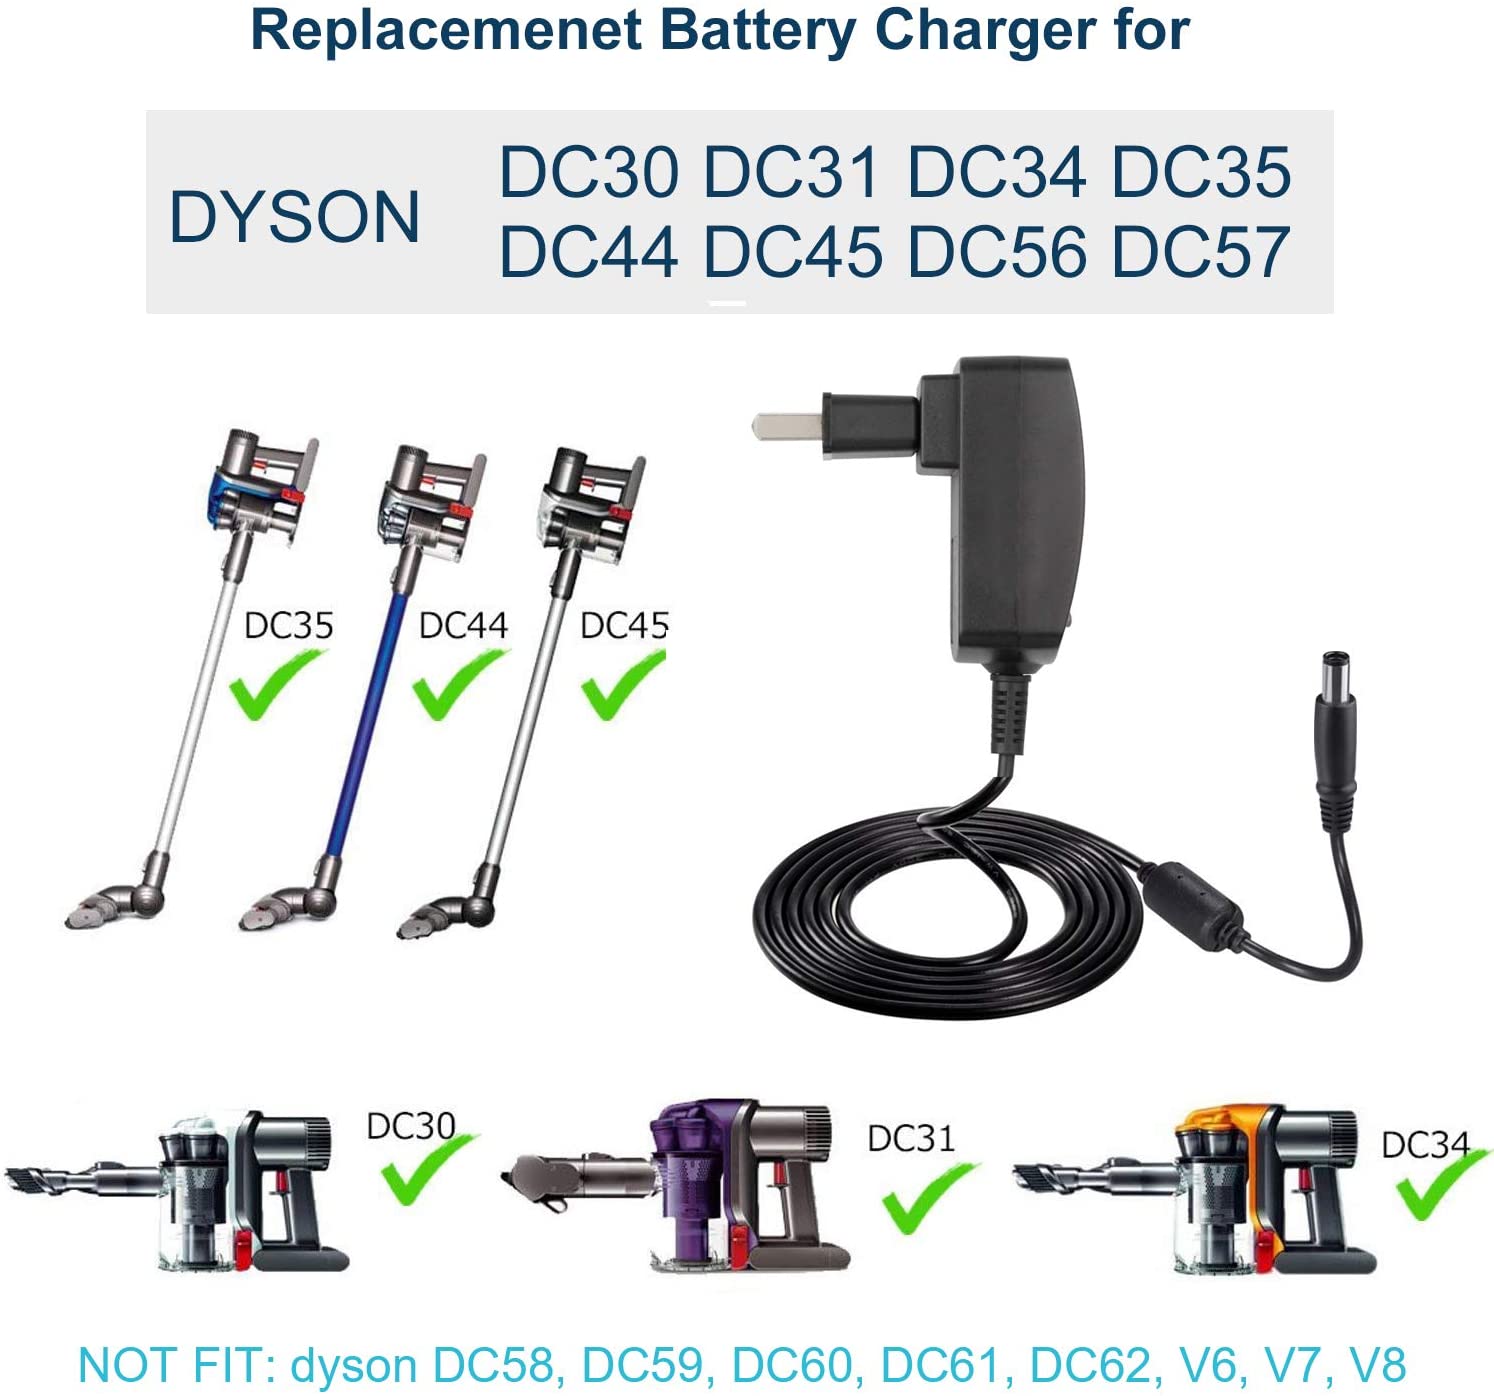 charger for Dyson DC30, DC31, DC34 Vacuum